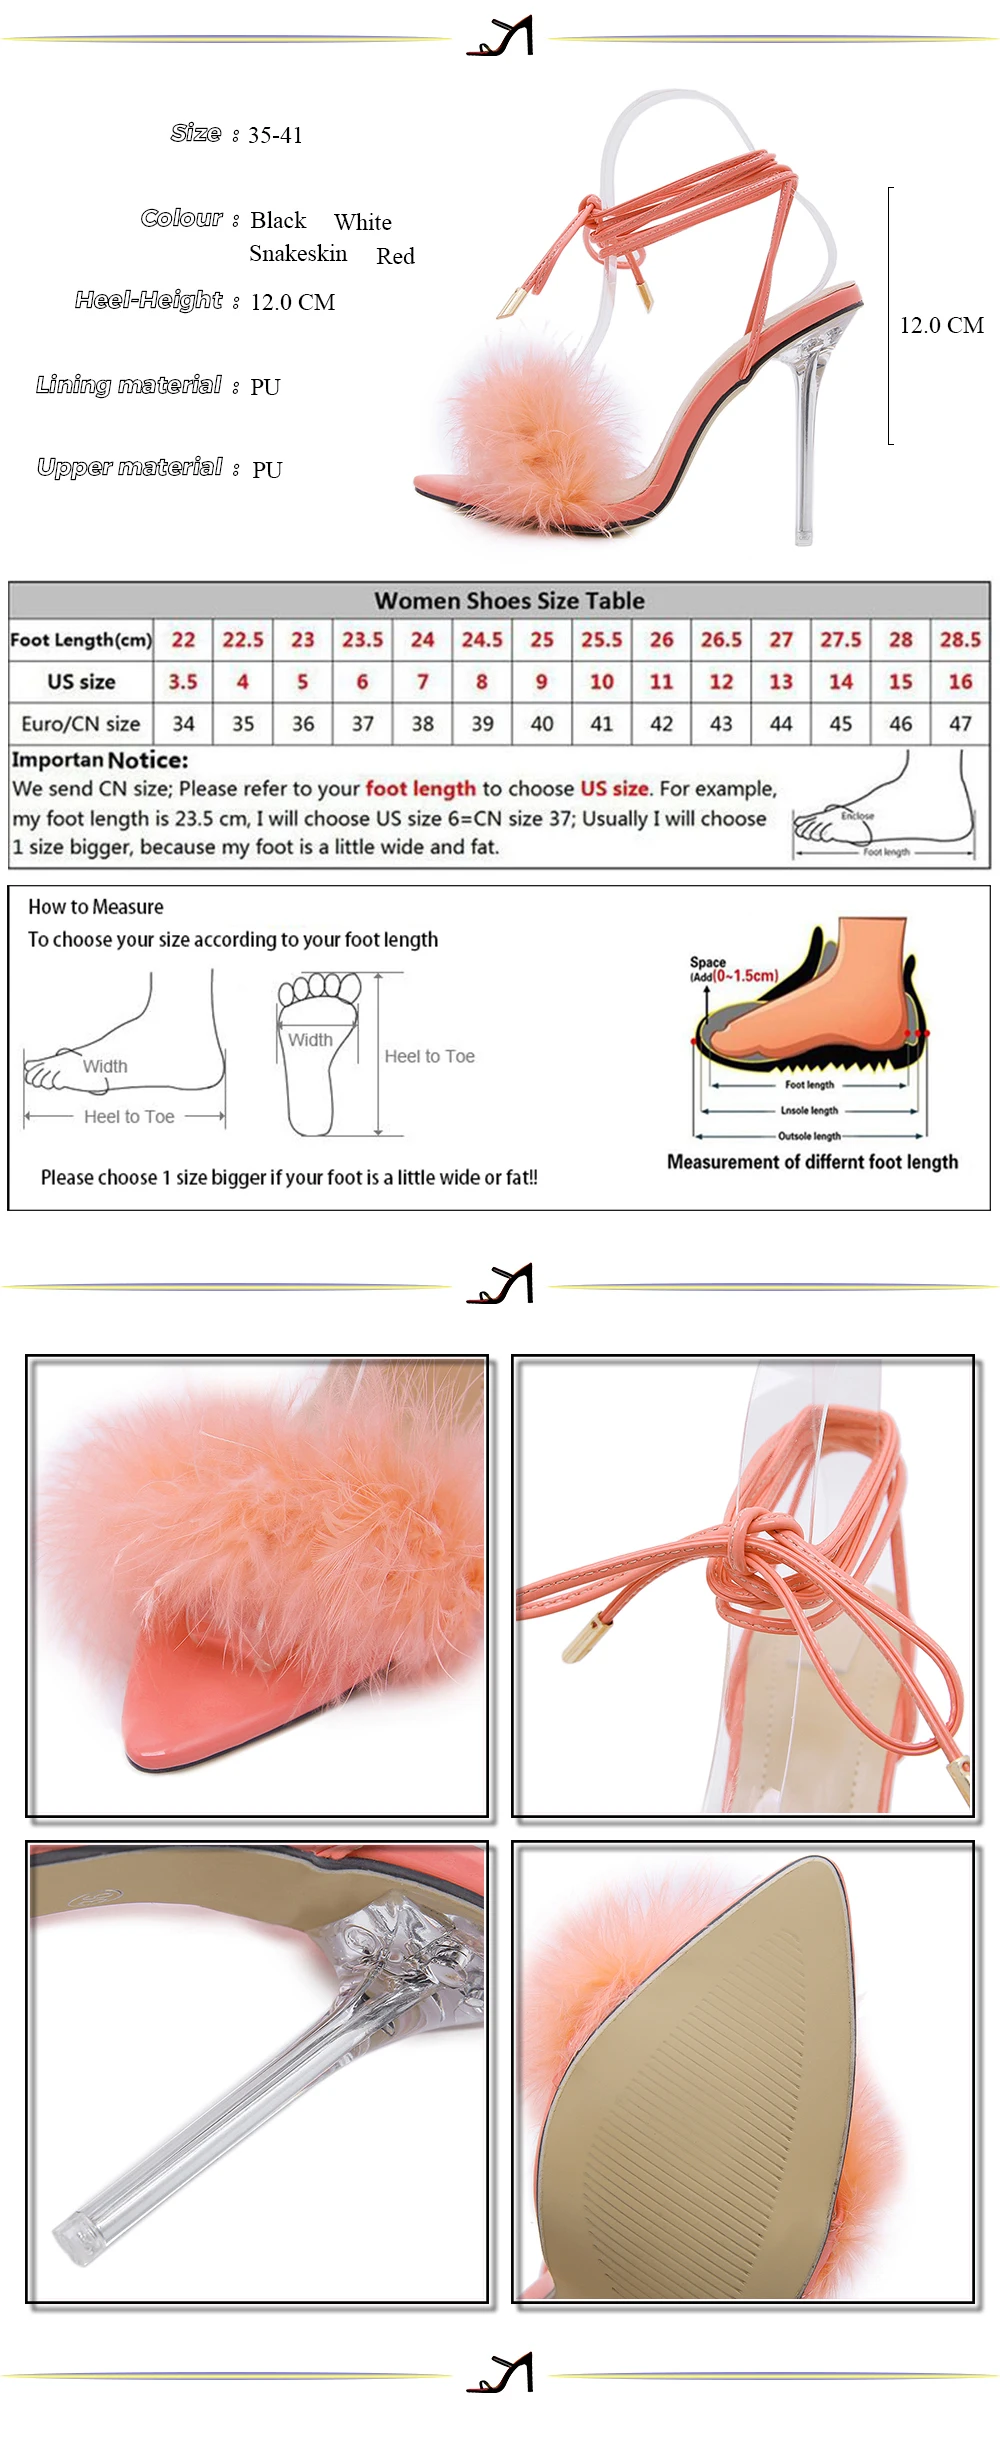 summer shoes woman pointed toe snake print high heels sexy feather women sandals ankle cross strap transparent clear heel